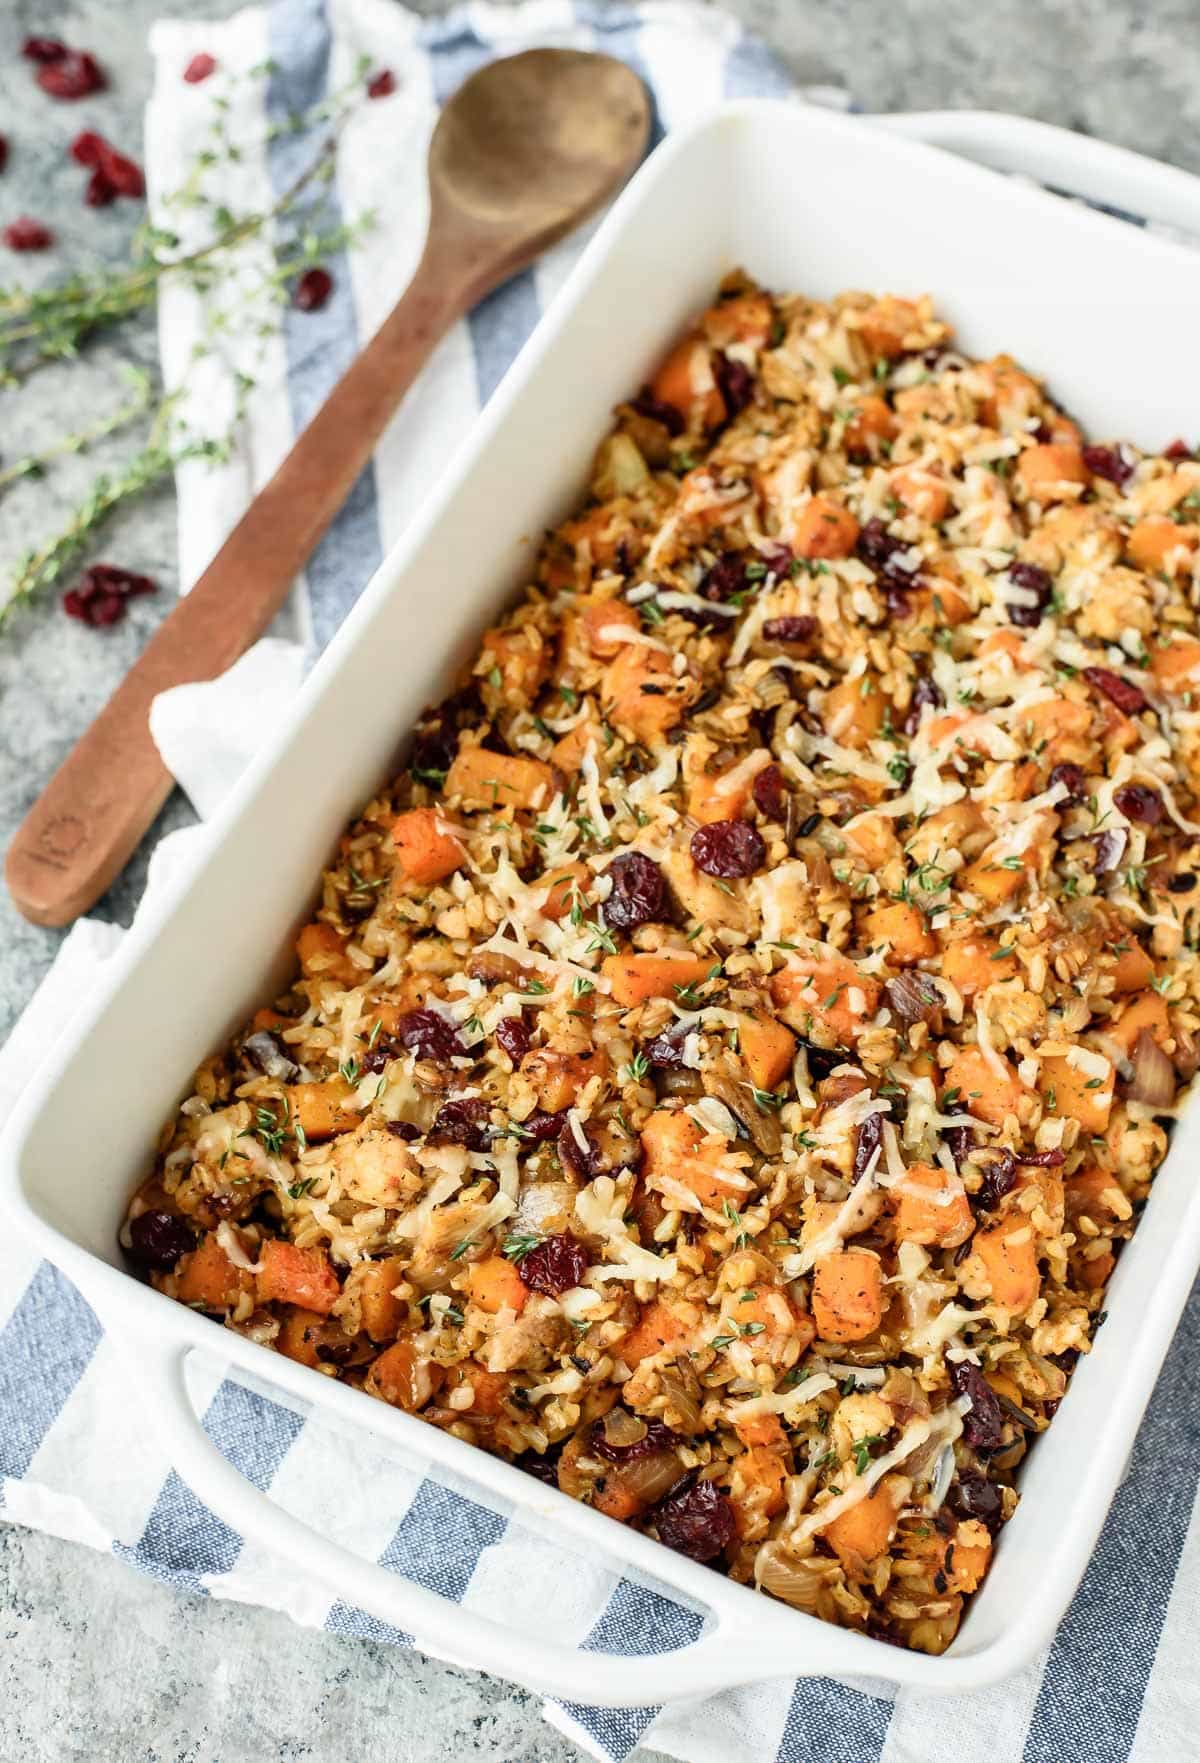 Chicken and Wild Rice Casserole with Butternut Squash and Cranberries from wellplated.com on foodiecrush.com